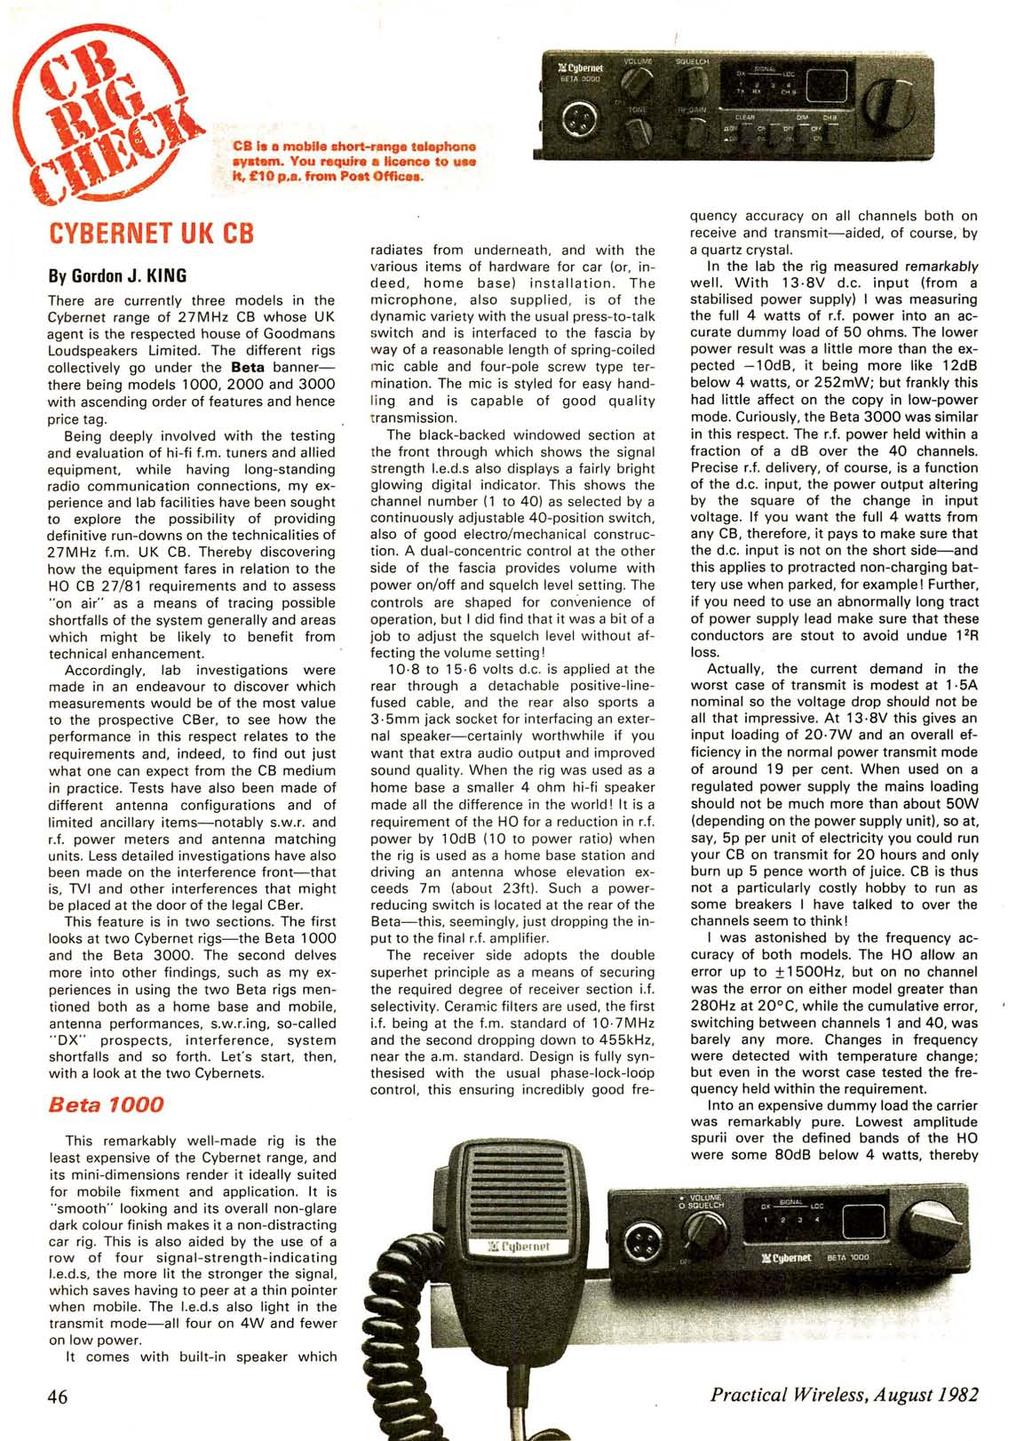 www.americanradiohistory.com CB la 11 mobile ahort-range telephone ayatem. You require alic:ence to... e t. 10 p.a. from Poet Offices. CYBERNET UK CB By Gordon J.